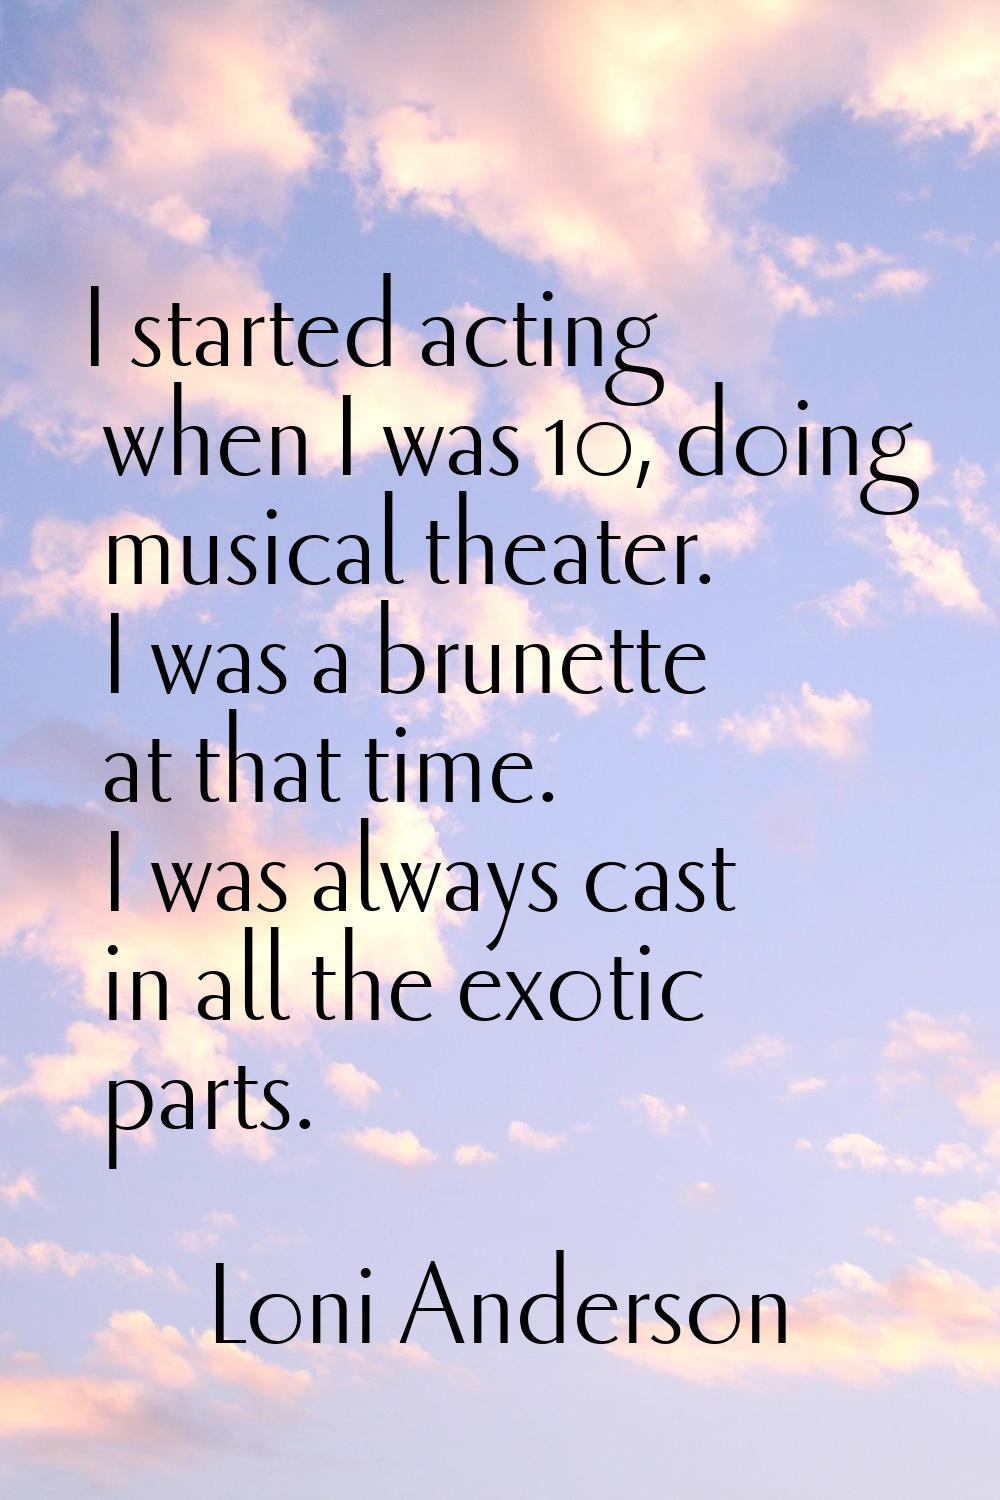 I started acting when I was 10, doing musical theater. I was a brunette at that time. I was always 